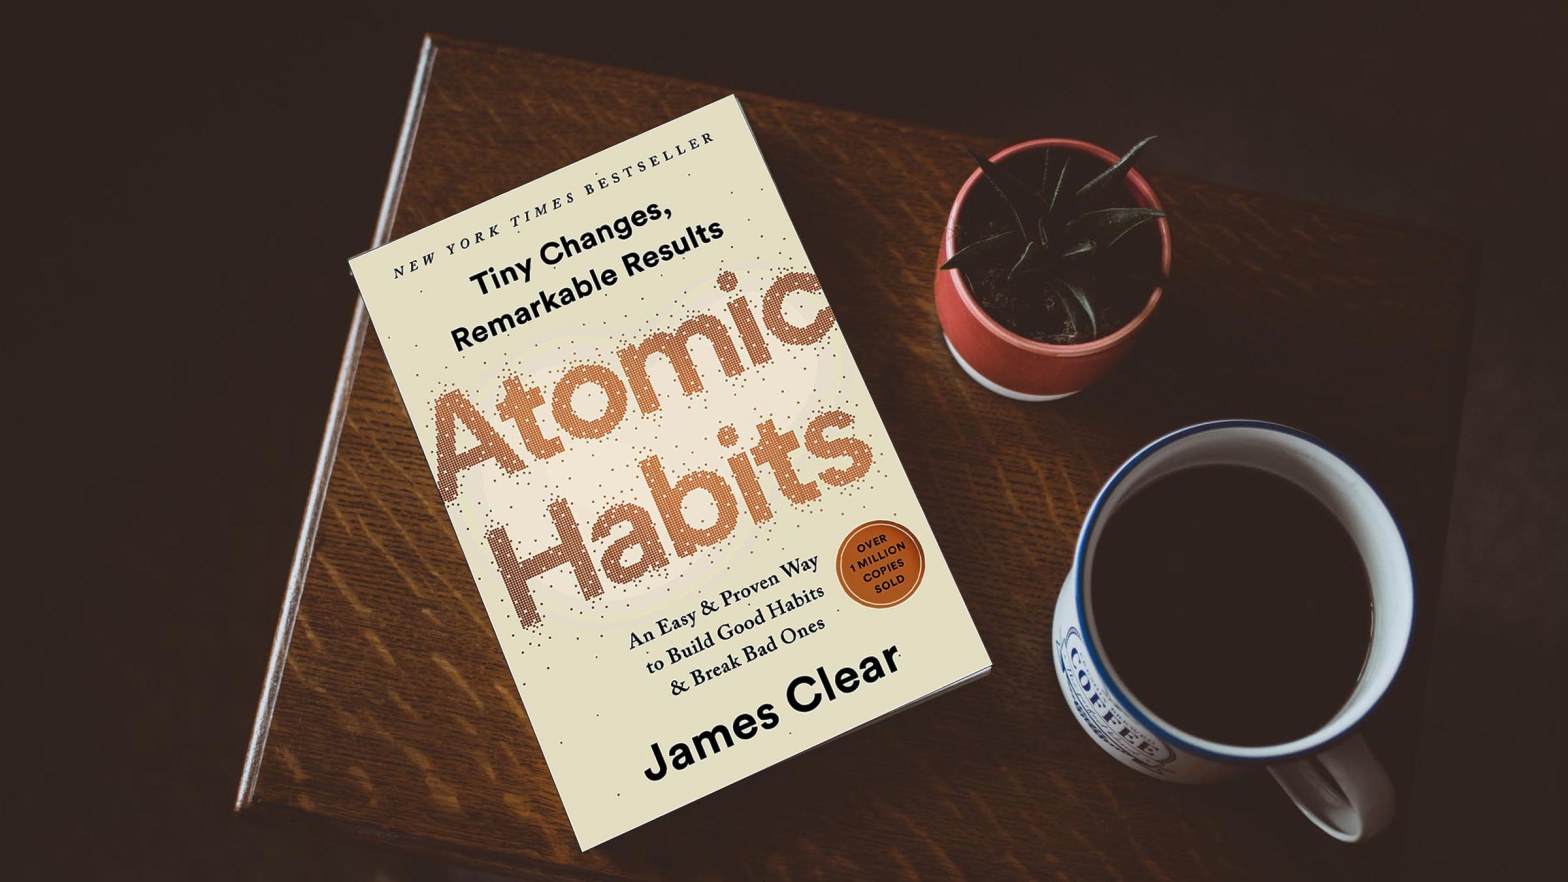 7 points from the book “Atomic Habits” by James Clear